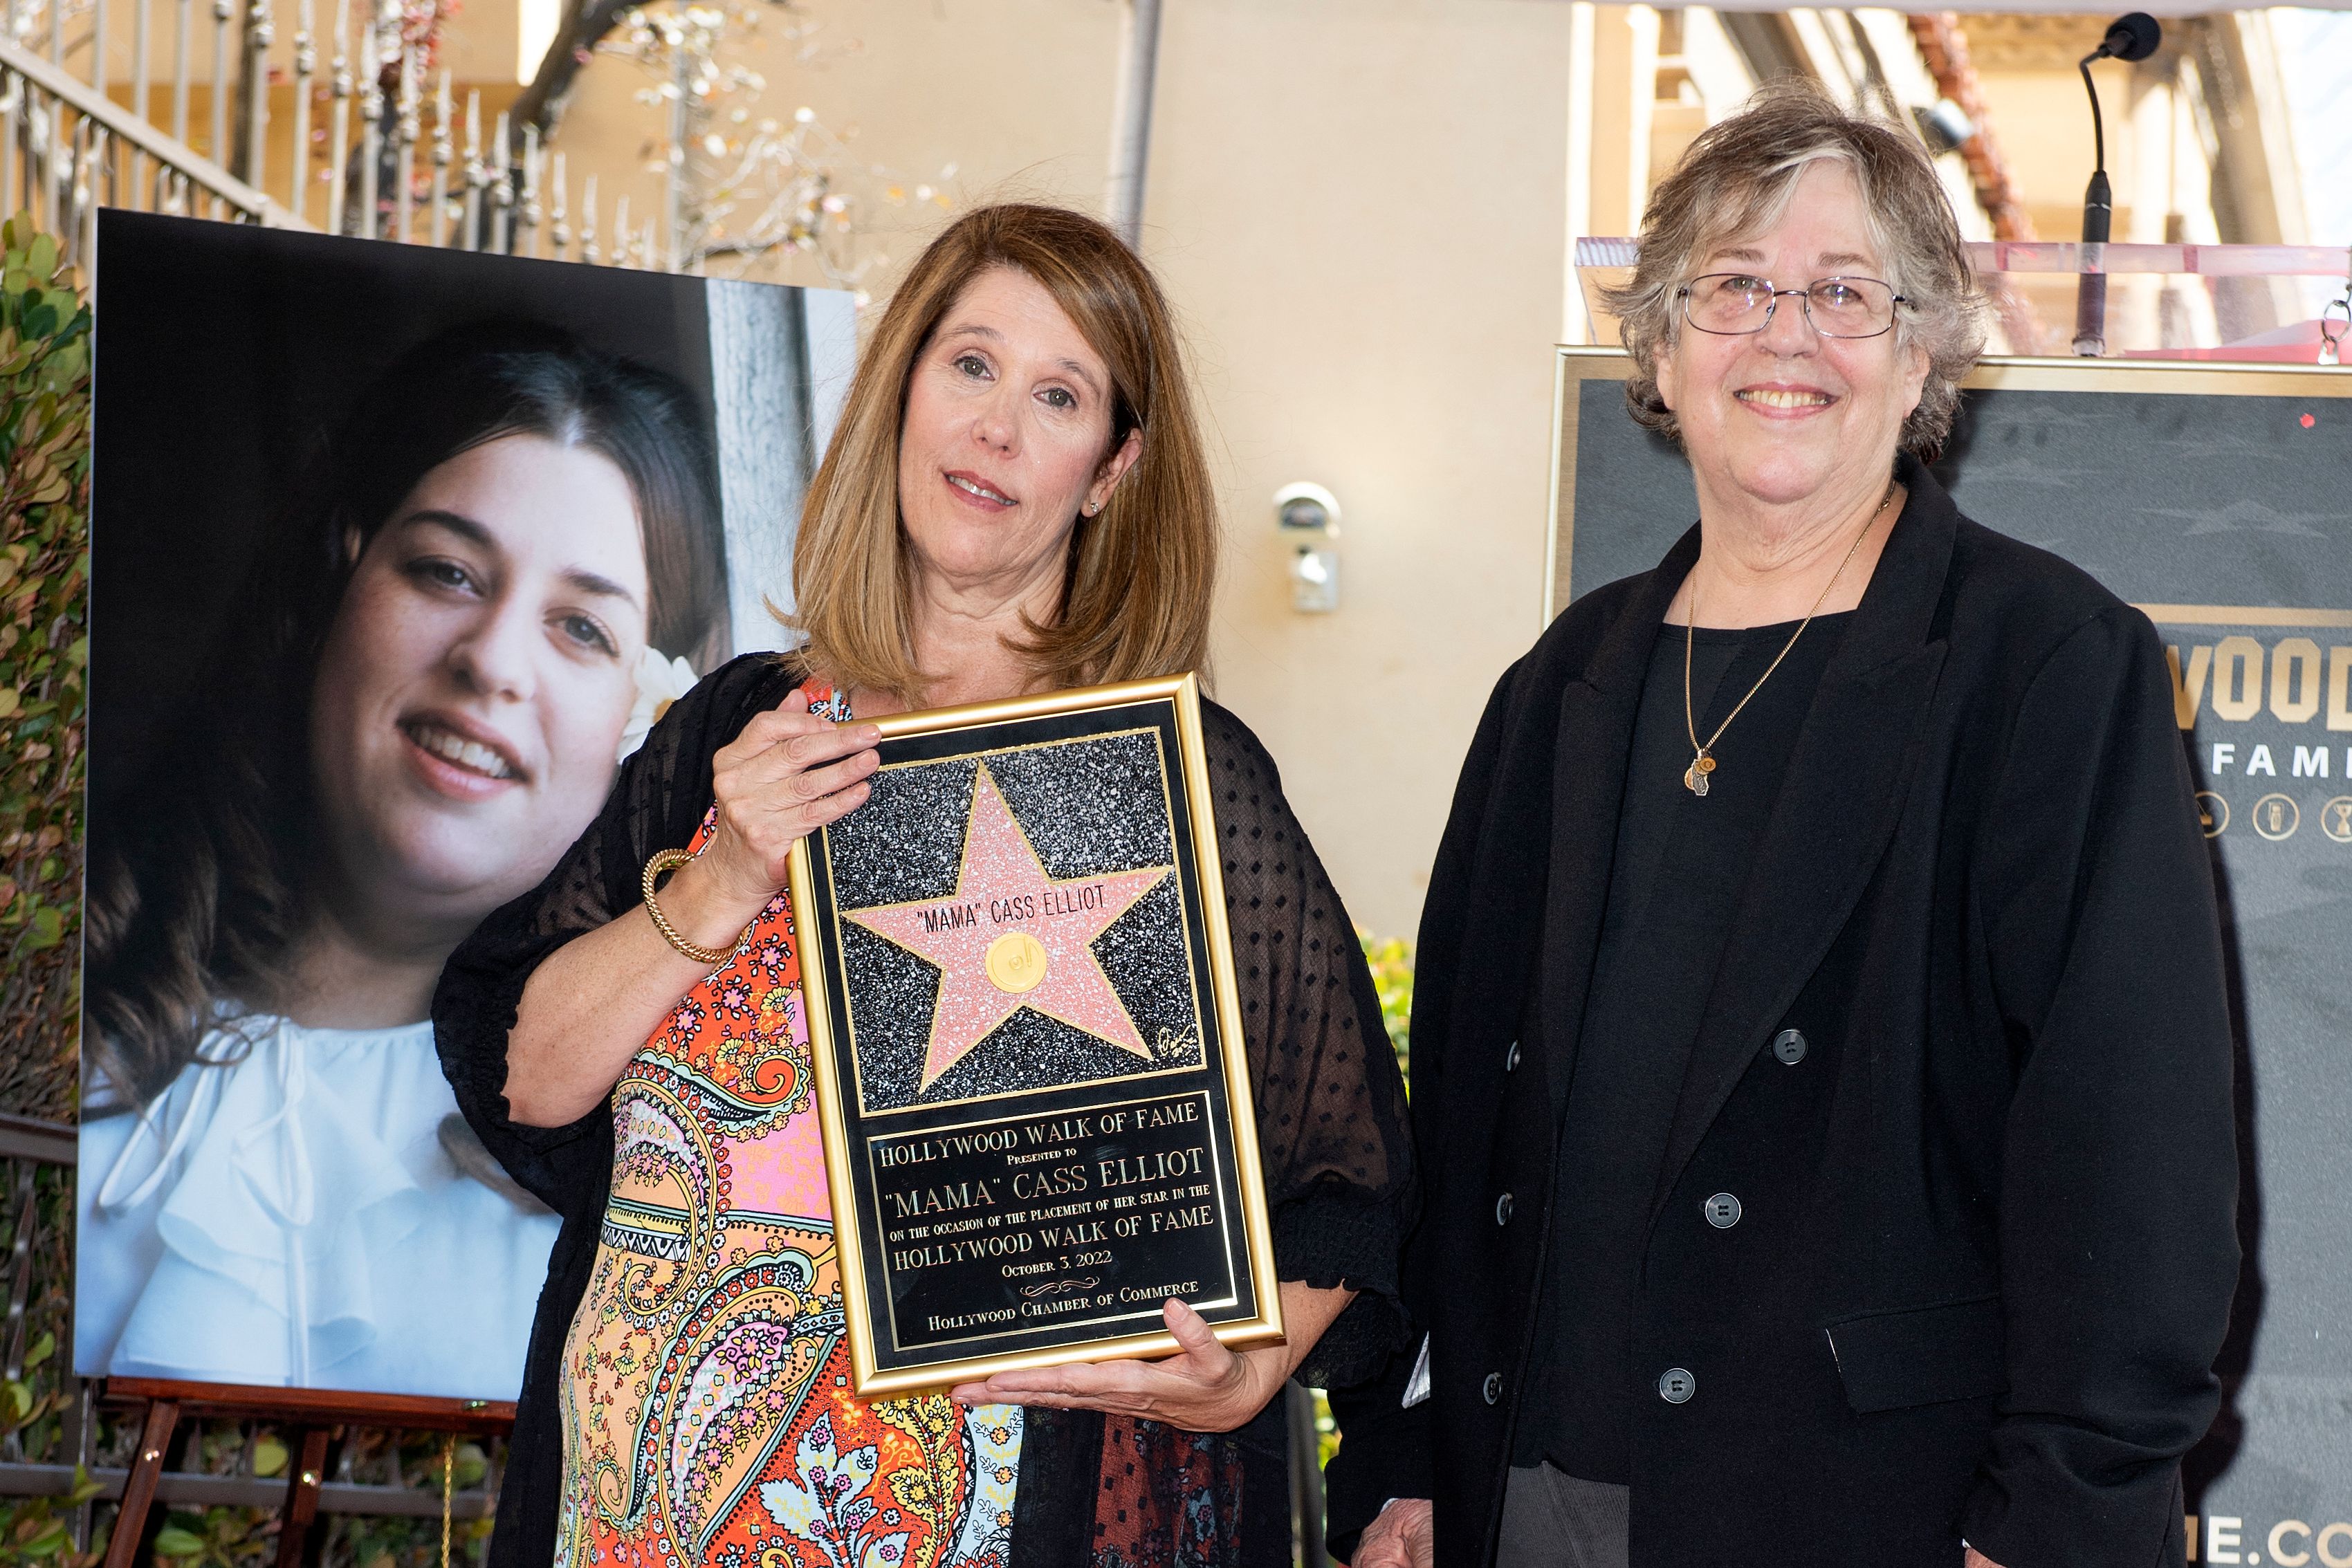 Owen Elliot-Kugell (L) and Leah Kunkel attend a ceremony for "Mama" Cass Elliott's posthumous star on the Hollywood Walk of Fame on October 3, 2022, in Hollywood, California. | Source: Getty Images